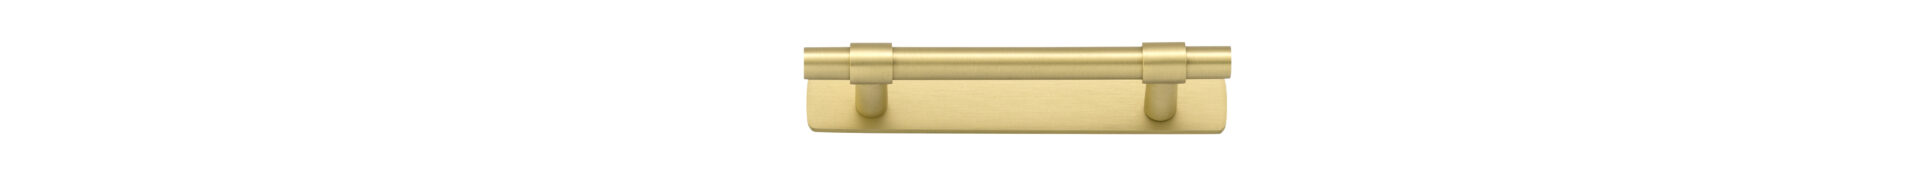 17151B - Helsinki Cabinet Pull with Backplate- CTC96mm - Brushed Gold PVD